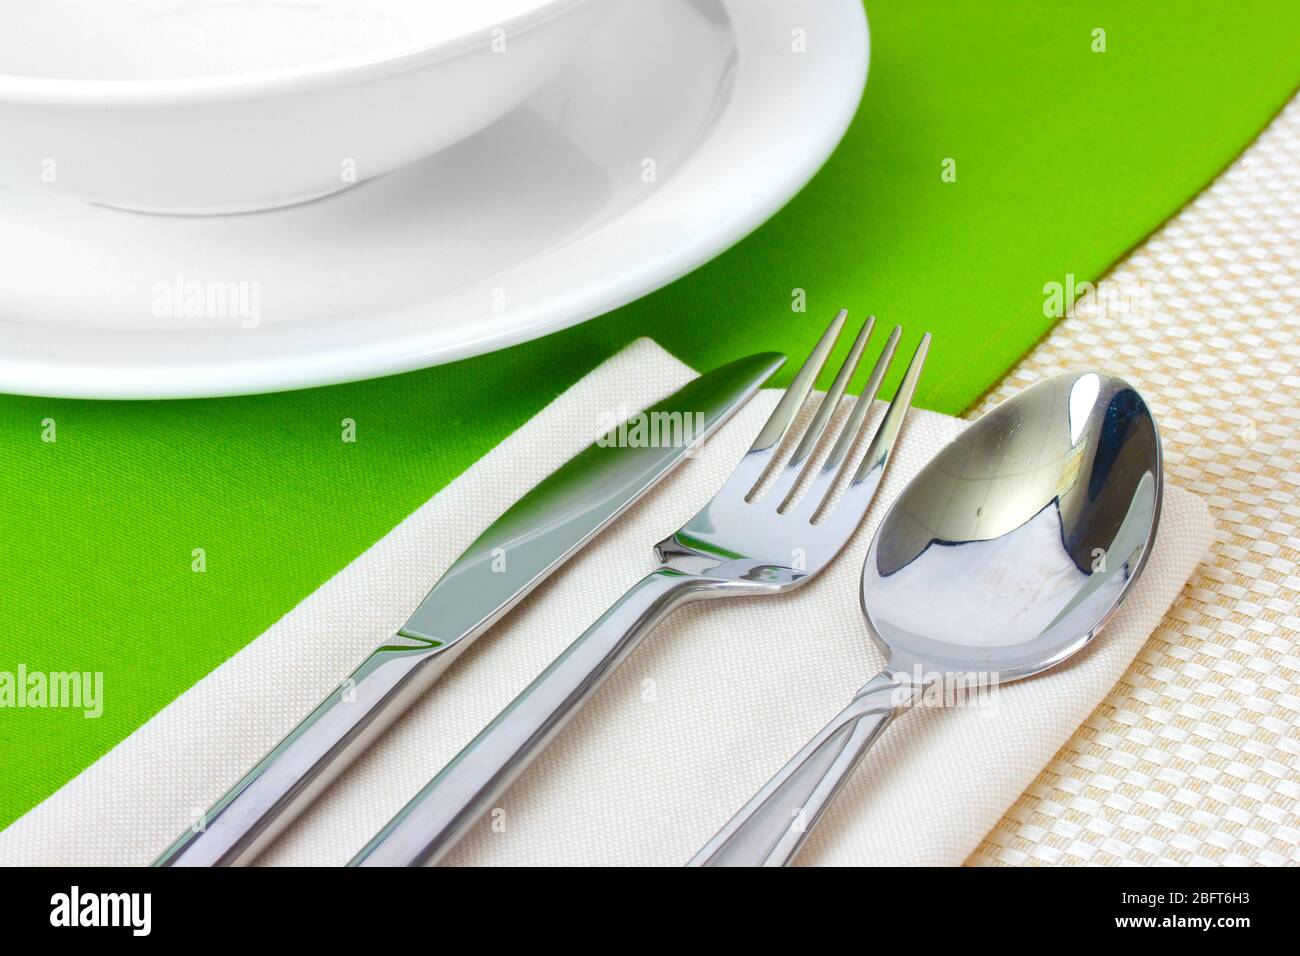 Table setting with fork, knife, spoon, plates, and napkin Stock Photo -  Alamy